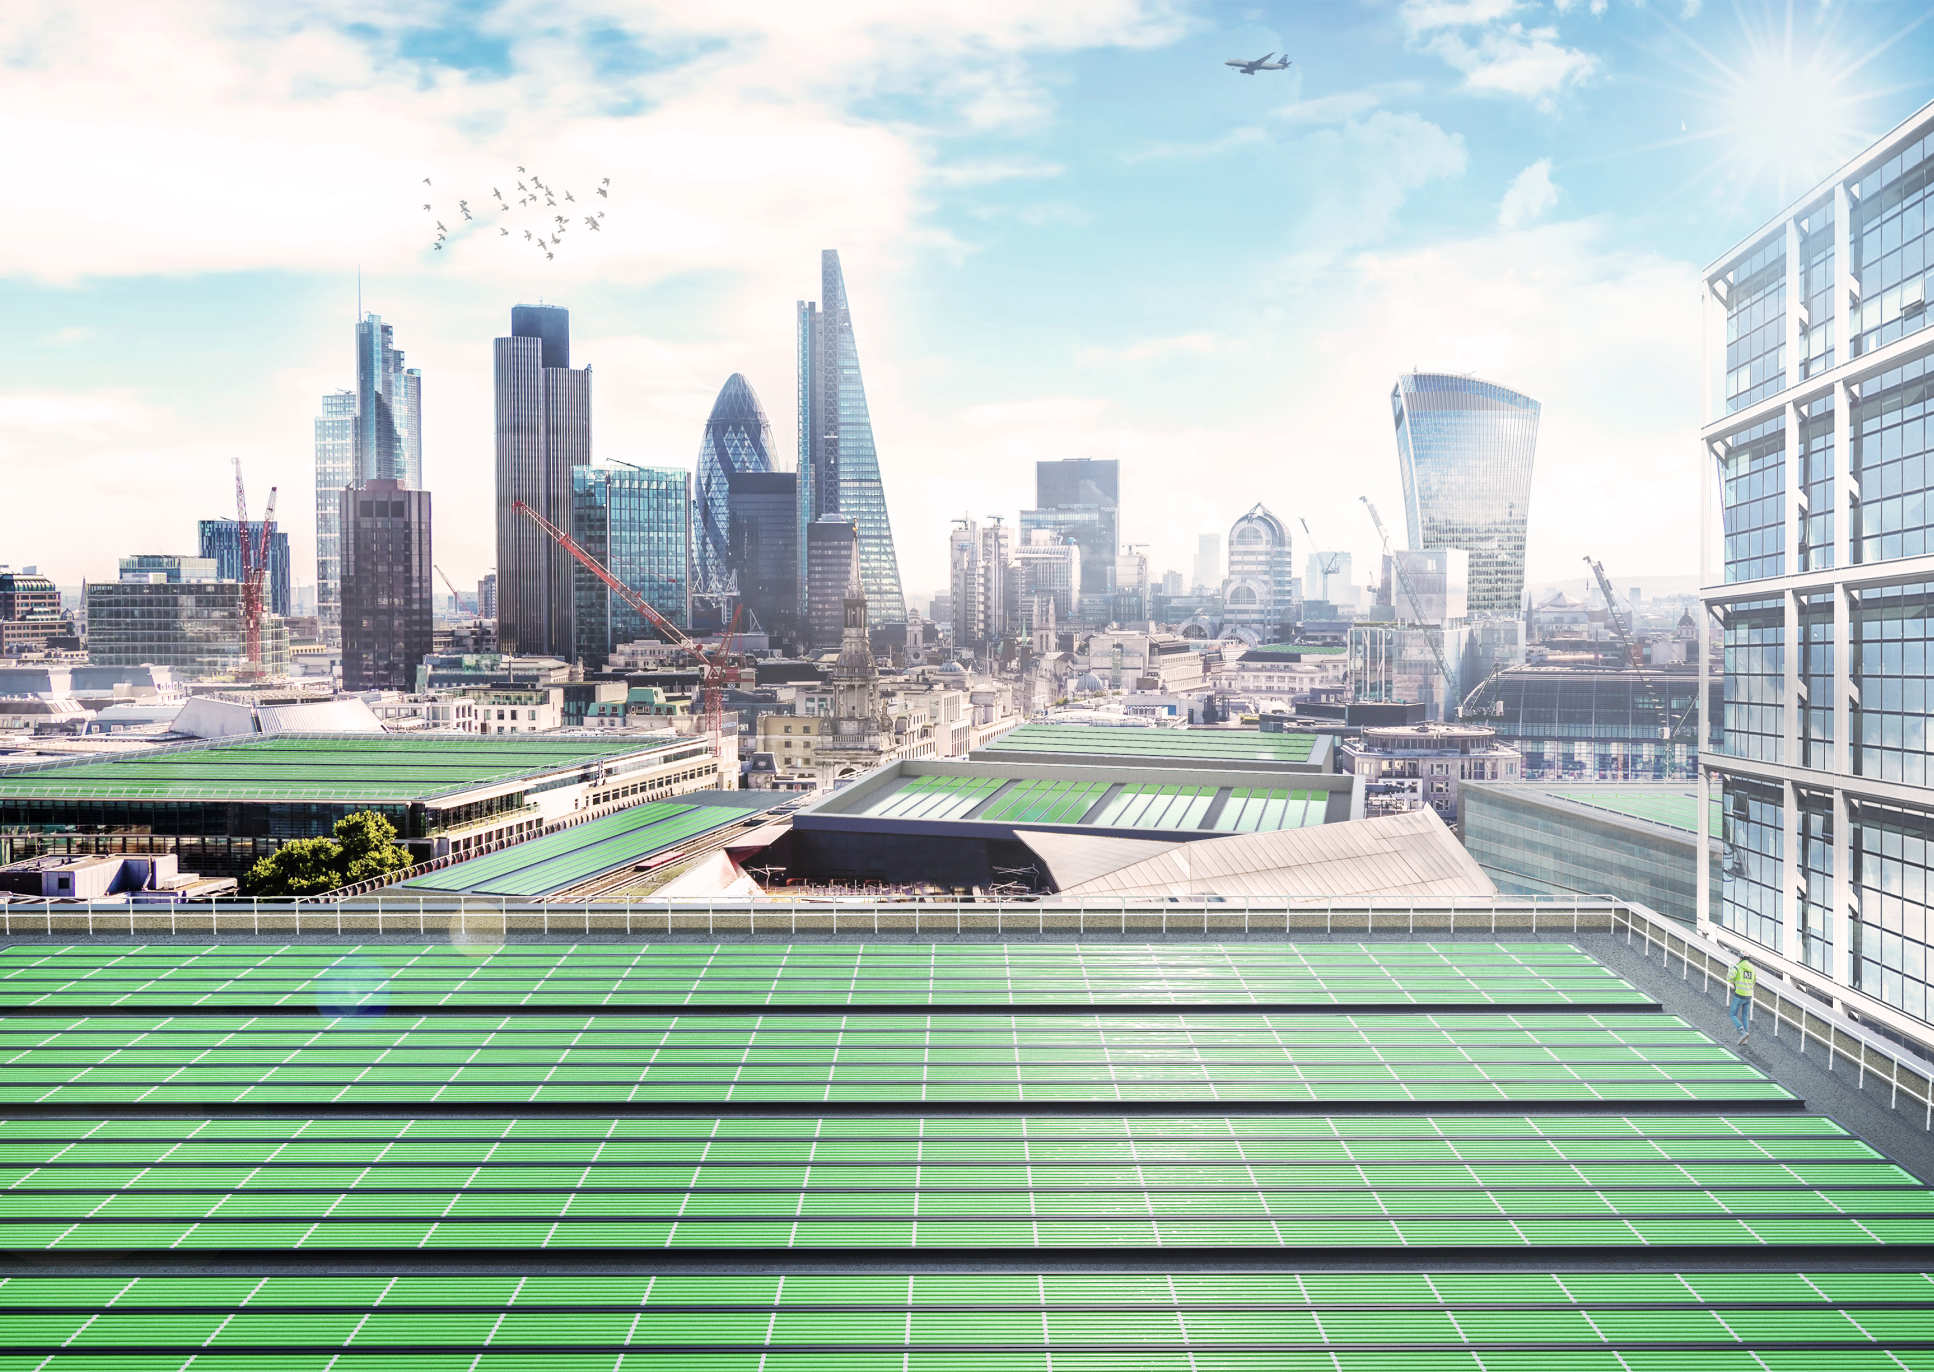 Artist impression of Arborea panels on London roofs (credit: Imperial College London // Thomas Glover)